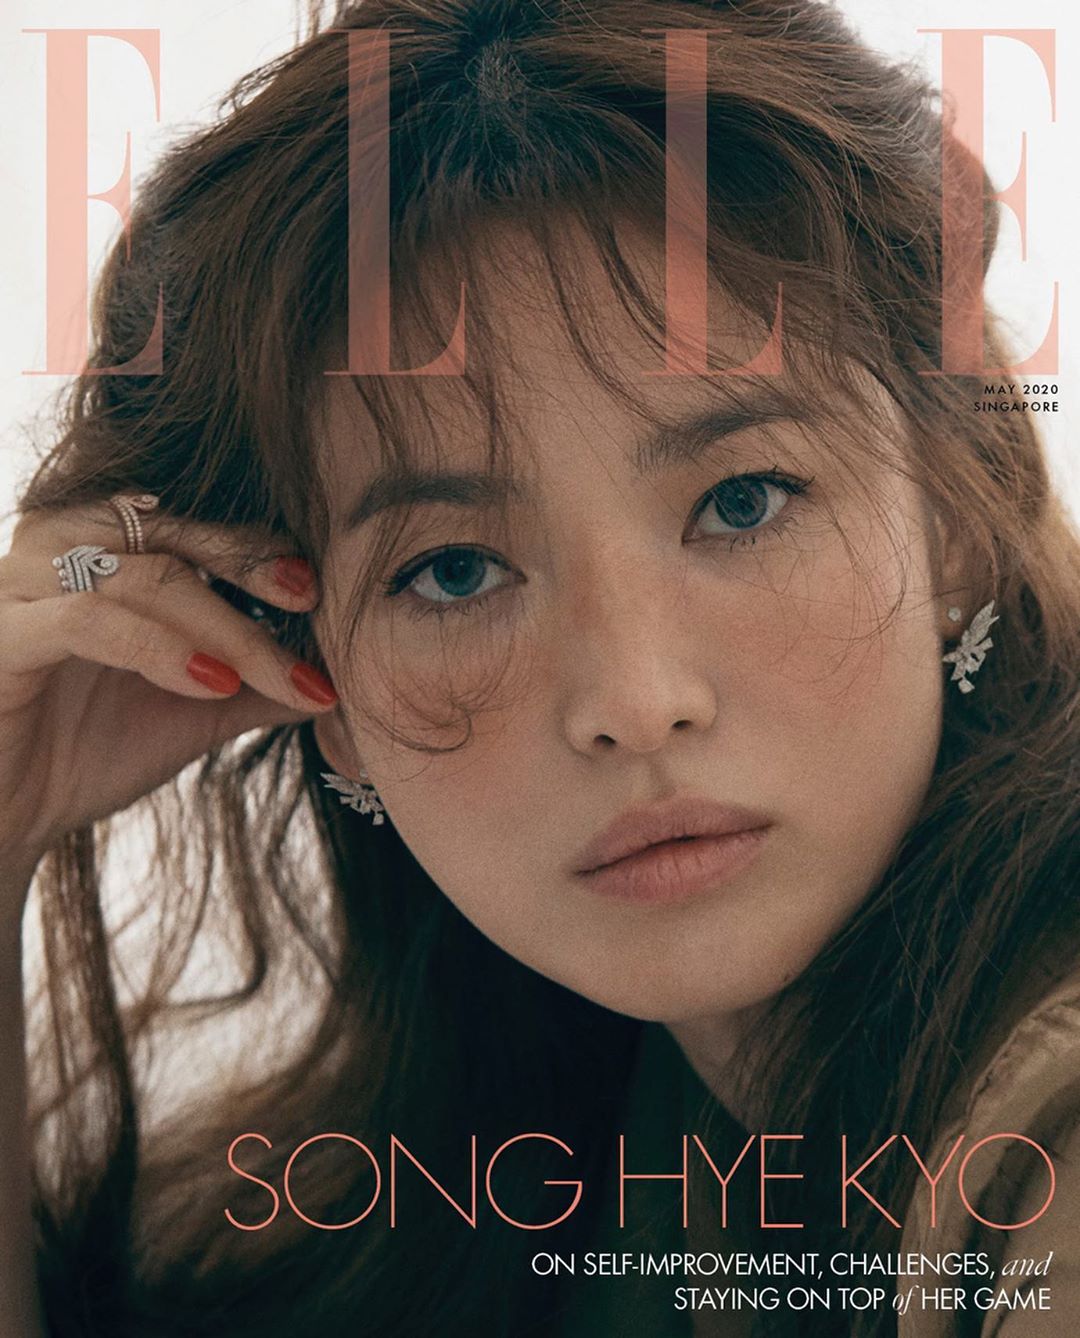 Actor Song Hye-kyo shot a fashion magazine and a picture in Singapore and shared a short Interview.Magazine Elle Singapore released the Interview wIth Song Hye-kyos picture on May 28 and 29, which covered the cover of May through the official Instagram.In the public photos, Song Hye-kyo created a unique atmosphere wIth professional poses, especially the semi-bundled wave hair styling and bold accessories that attract attention.Song Hye-kyo said in an Interview wIth the fashion magazine, I think I was very lucky.I have been able to do amazing works since I was a child, and they have been well received and loved by many people.I am grateful every day for It, he said.Meanwhile, Song is currently reviewing his next film.Photo: Singapore Elle